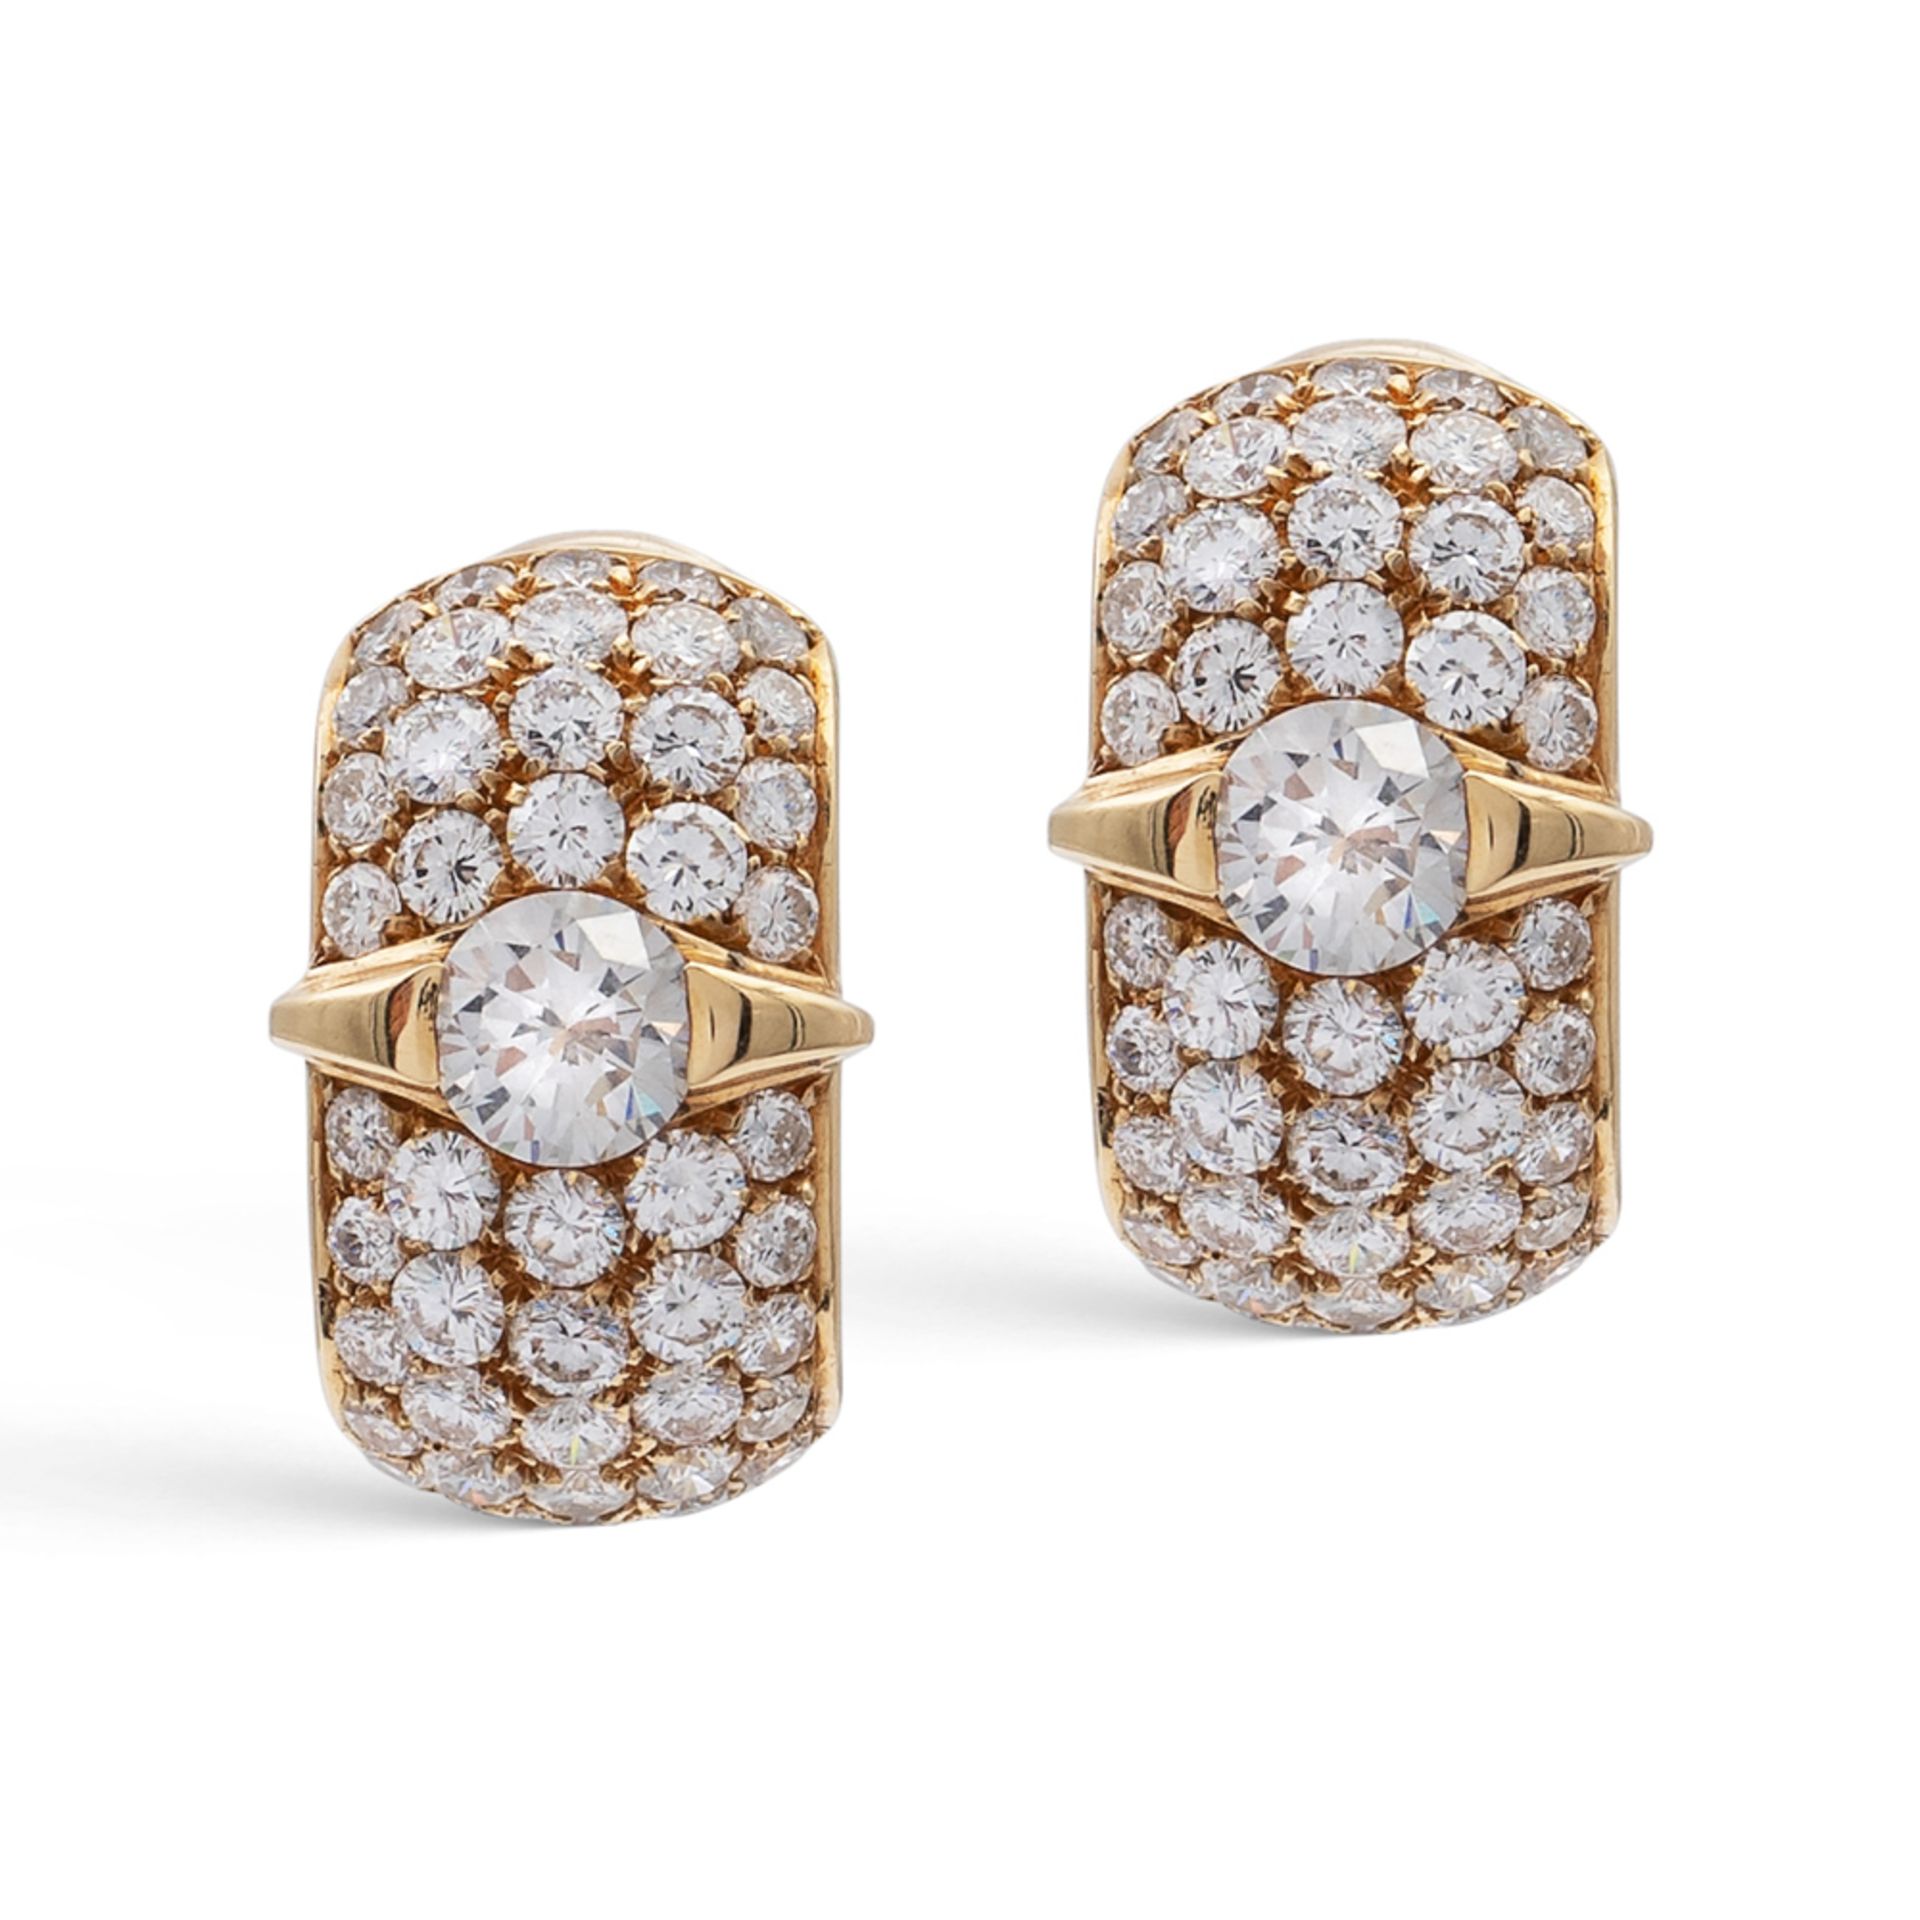 18kt yellow gold and diamond earrings weight 8,4 gr.